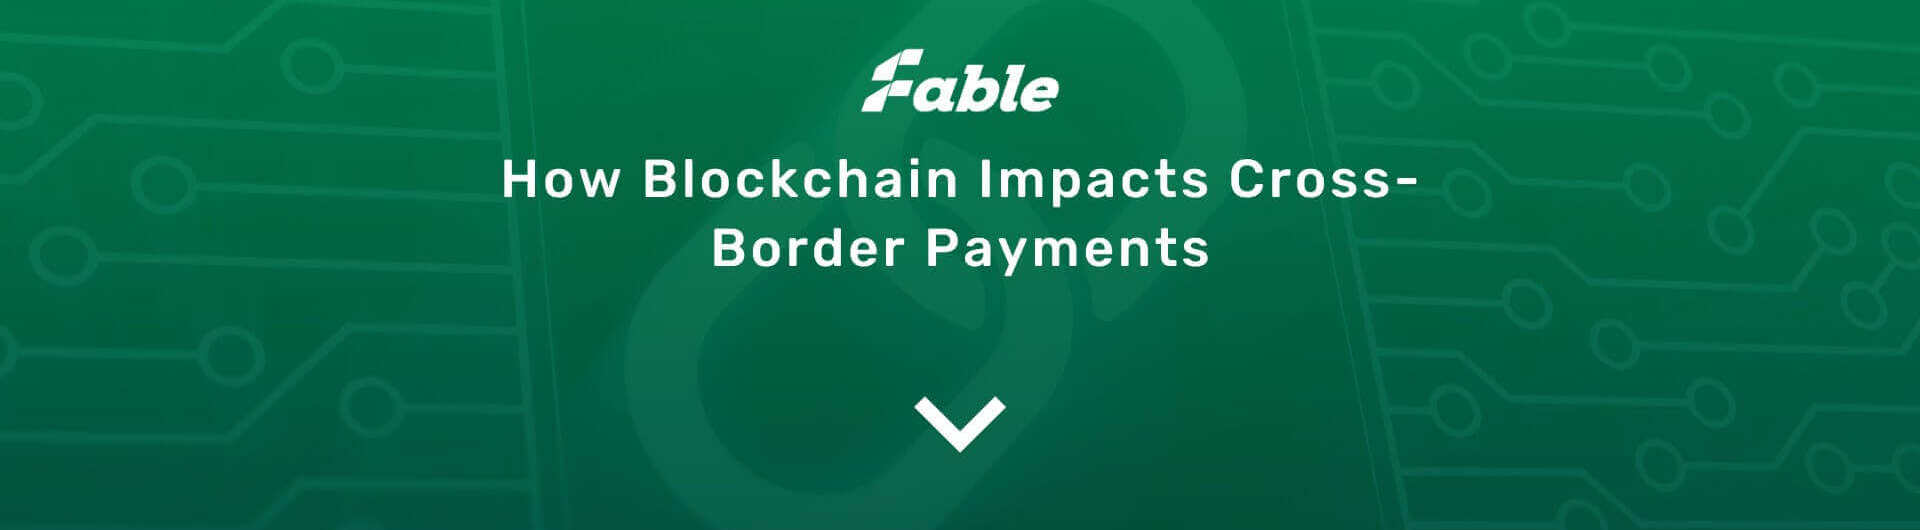 How Blockchain Impacts Cross-Border Payments